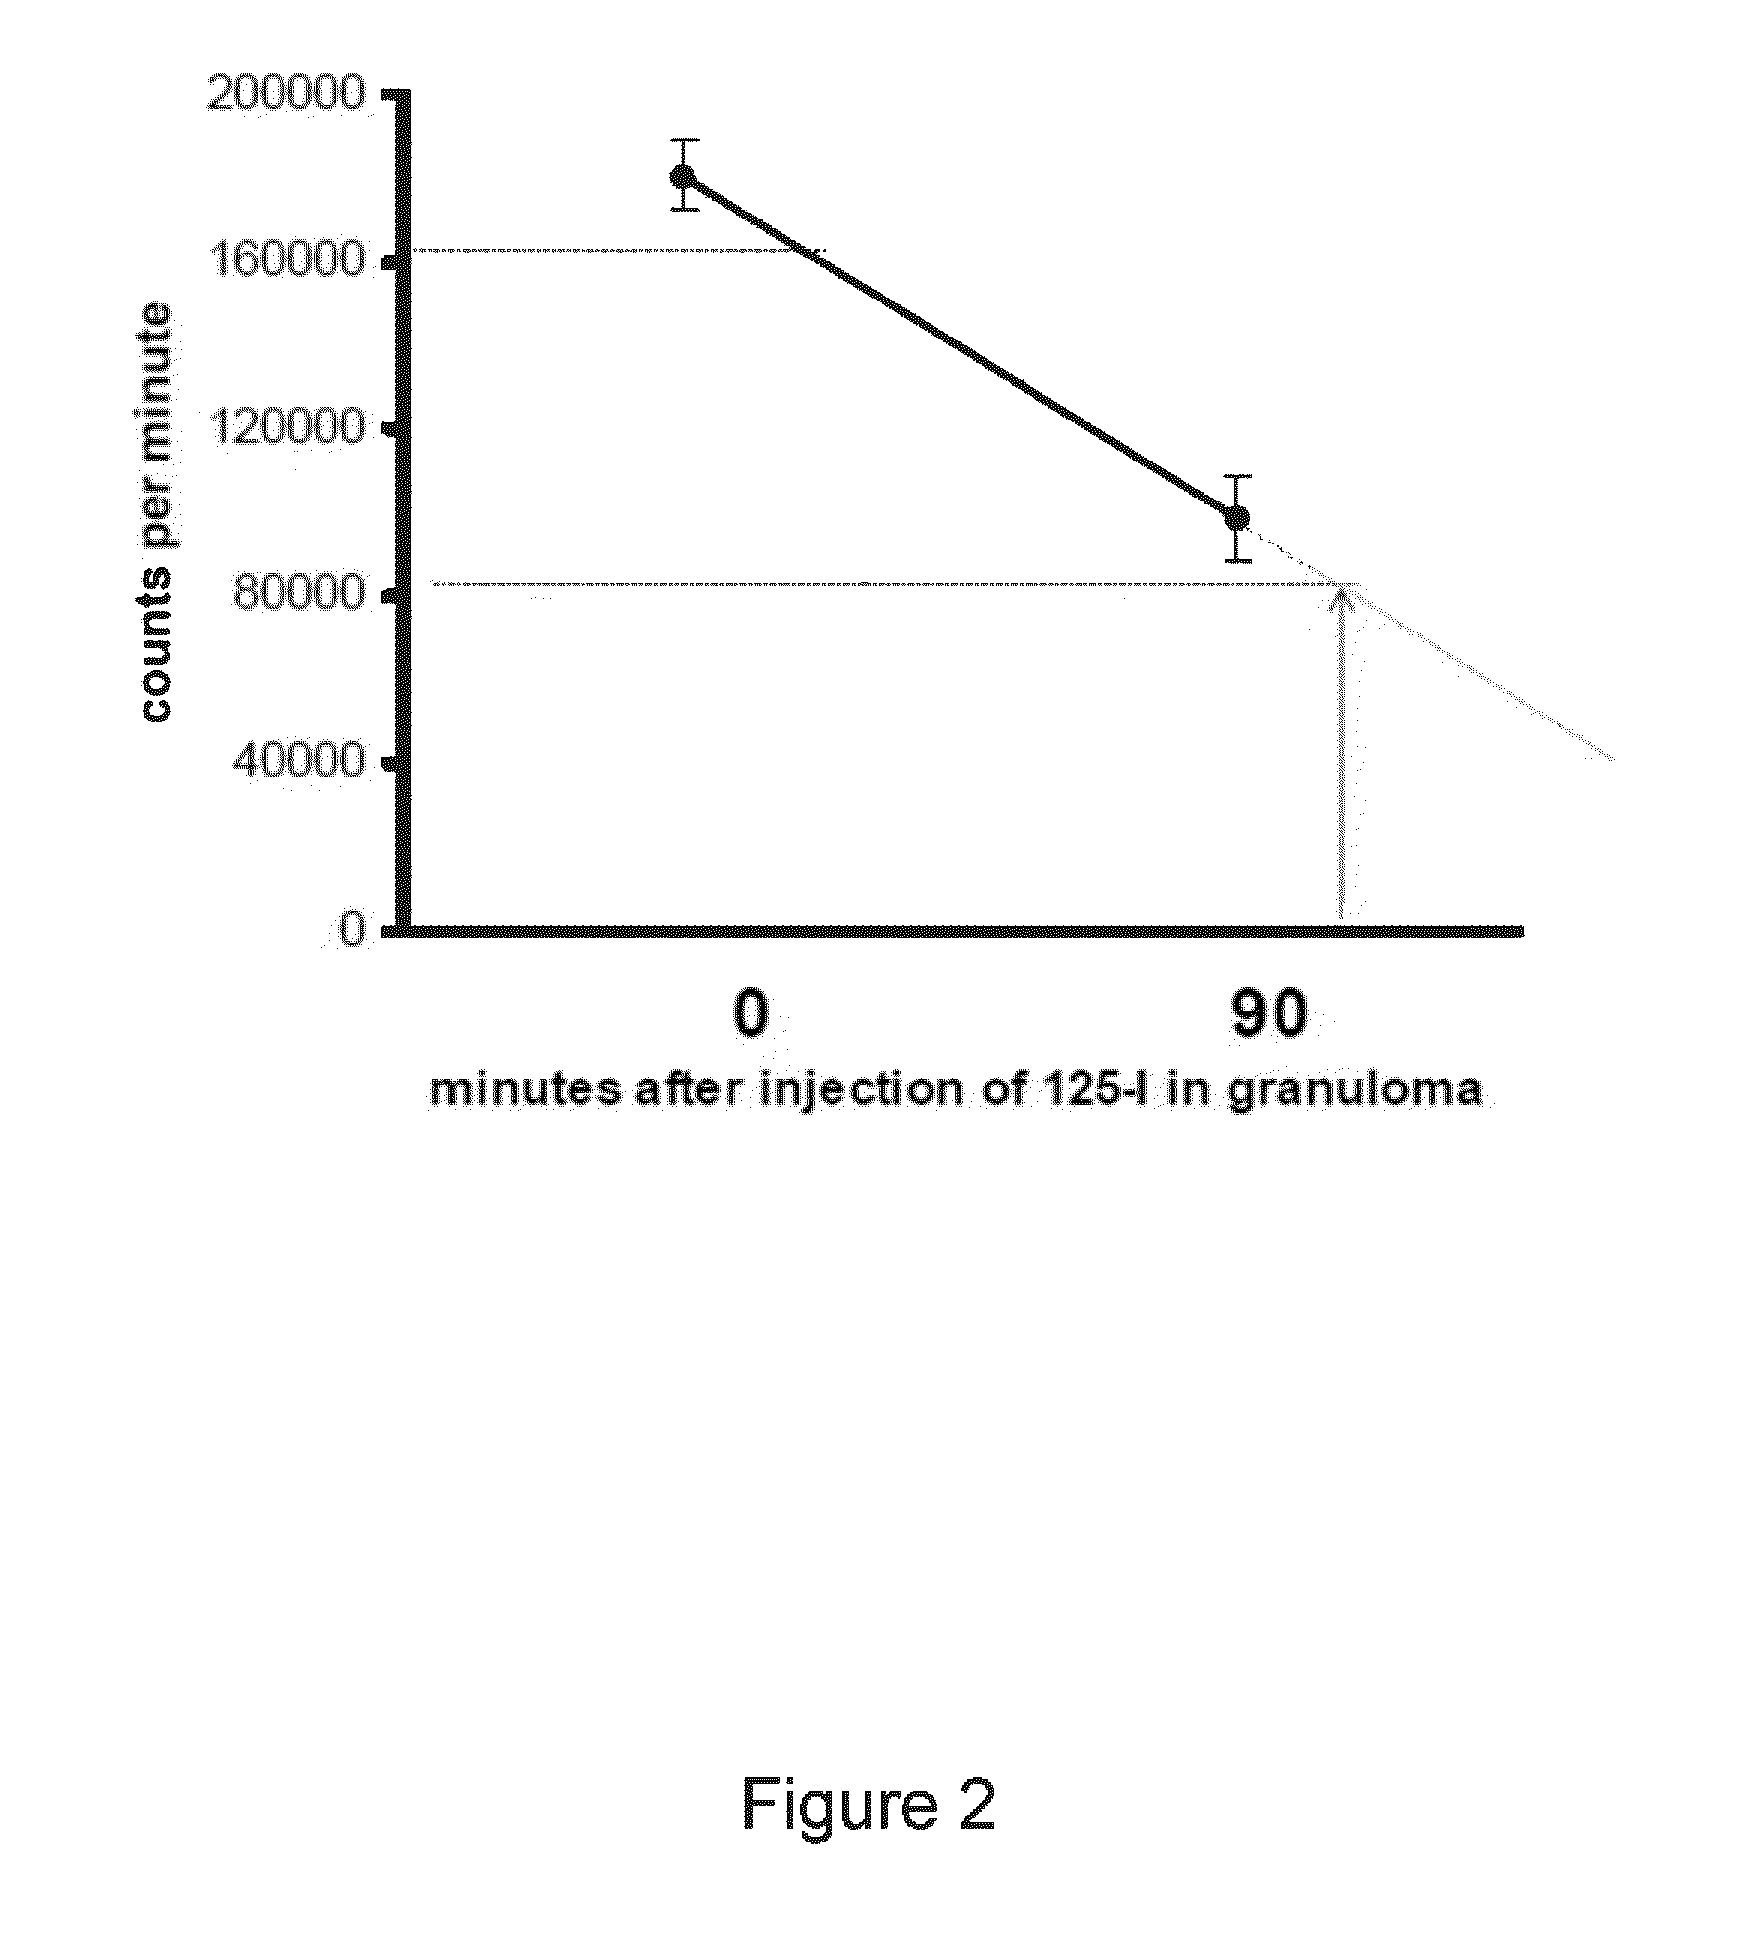 Apparatus and Process for Generating and Harvesting Adult Stem Cells and Fluid Associated with it from Skin and Omentum for Medical, Cosmetic, and Veterinary Use